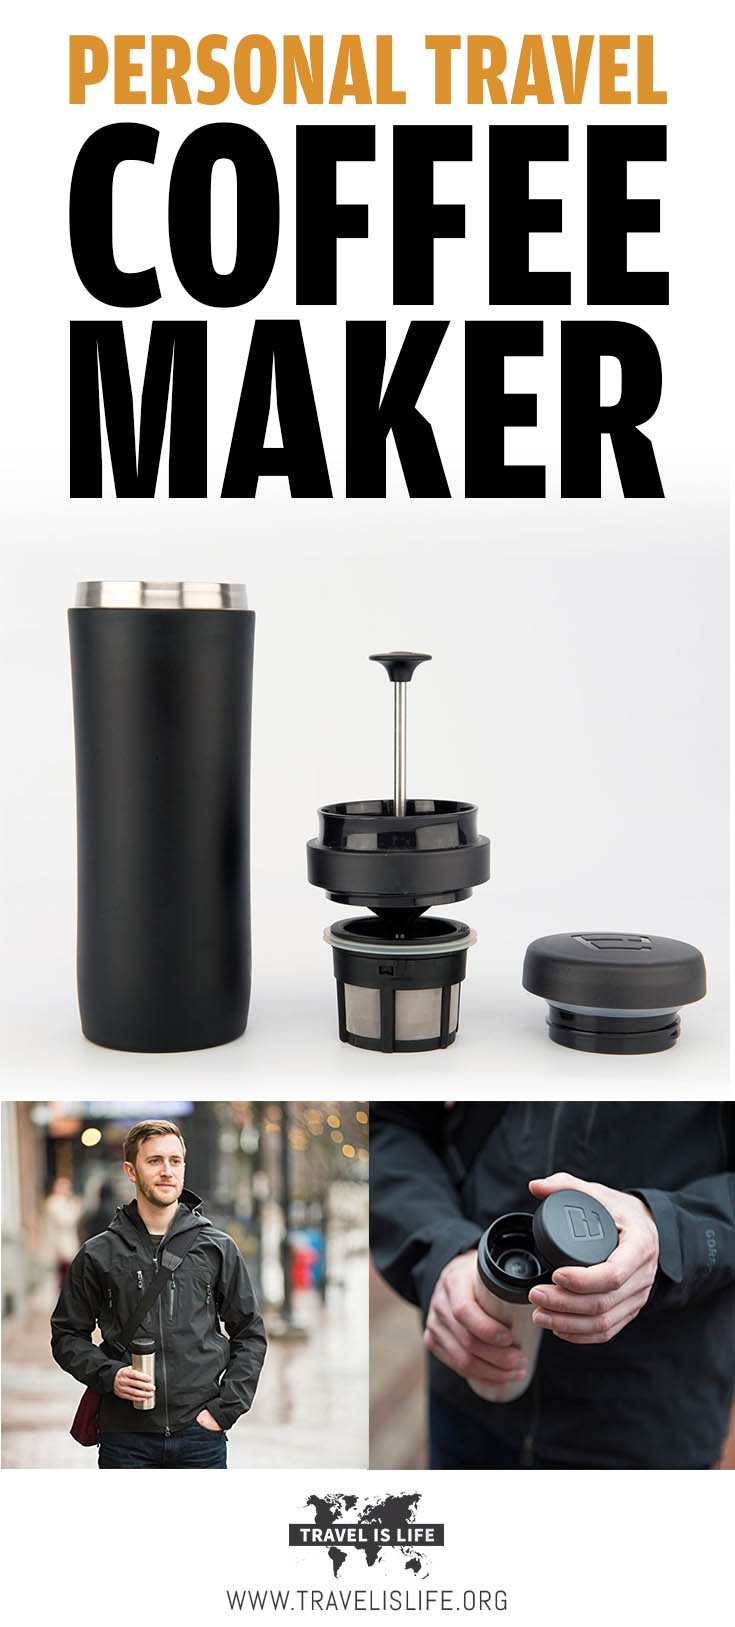 Personal Travel Coffee Maker